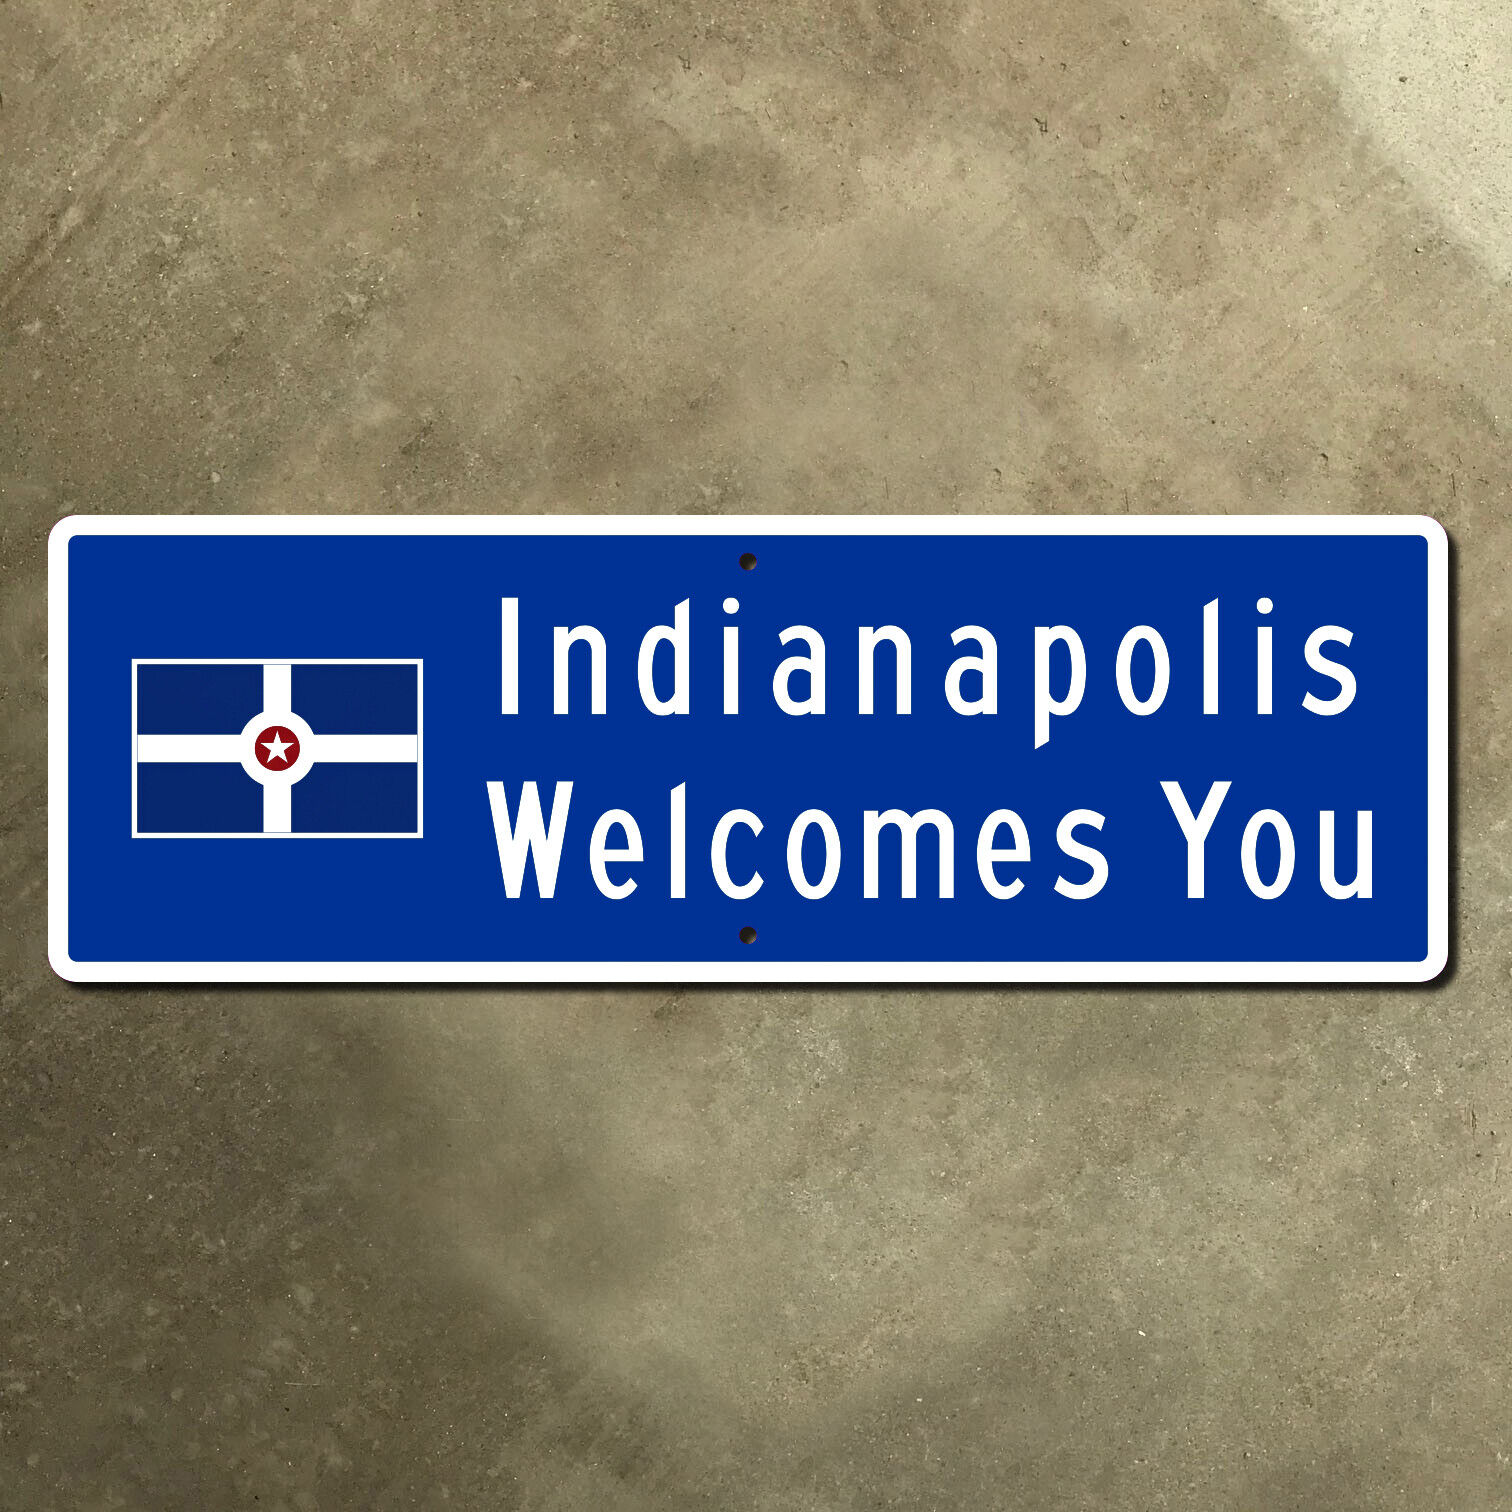 Indianapolis welcomes you Indiana city limit highway marker road sign 30x10